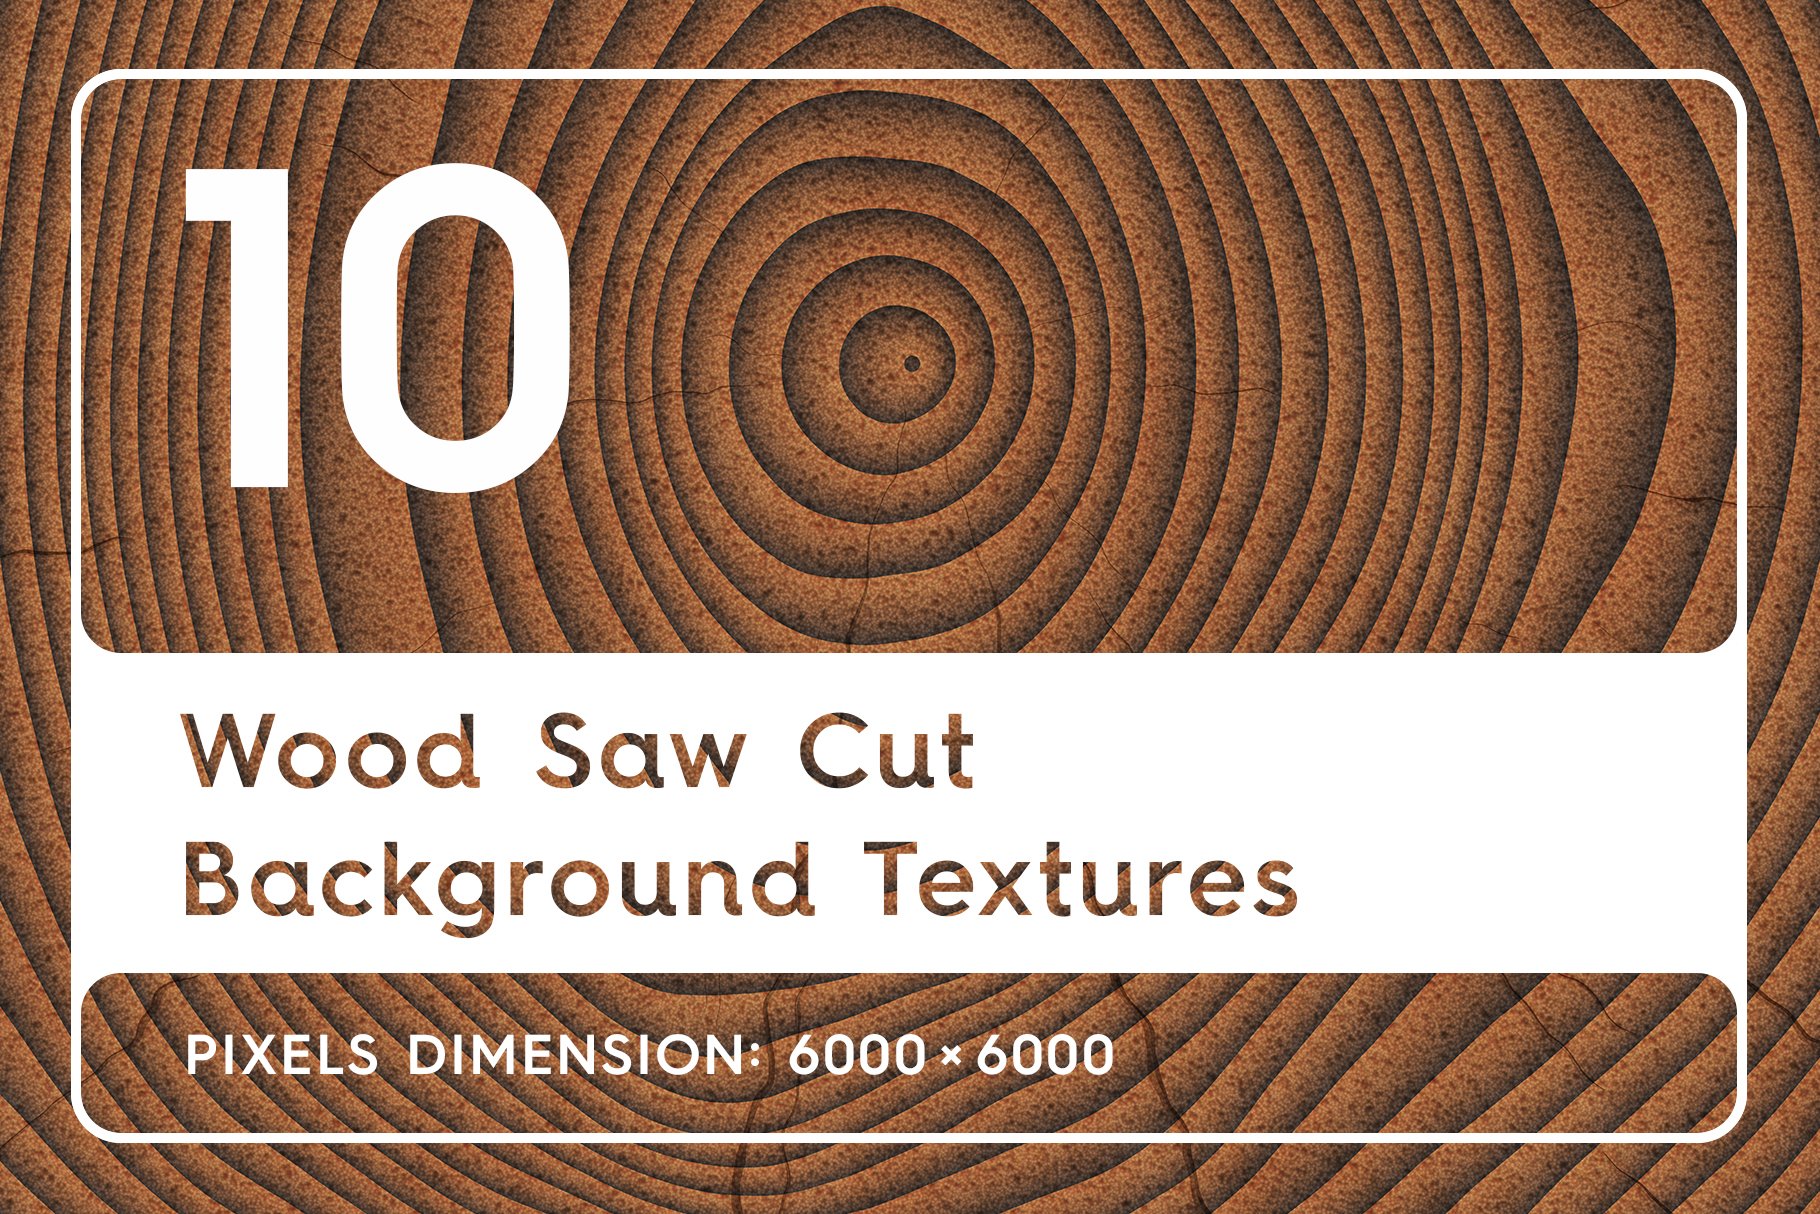 10 Wood Saw Cut Background Textures cover image.